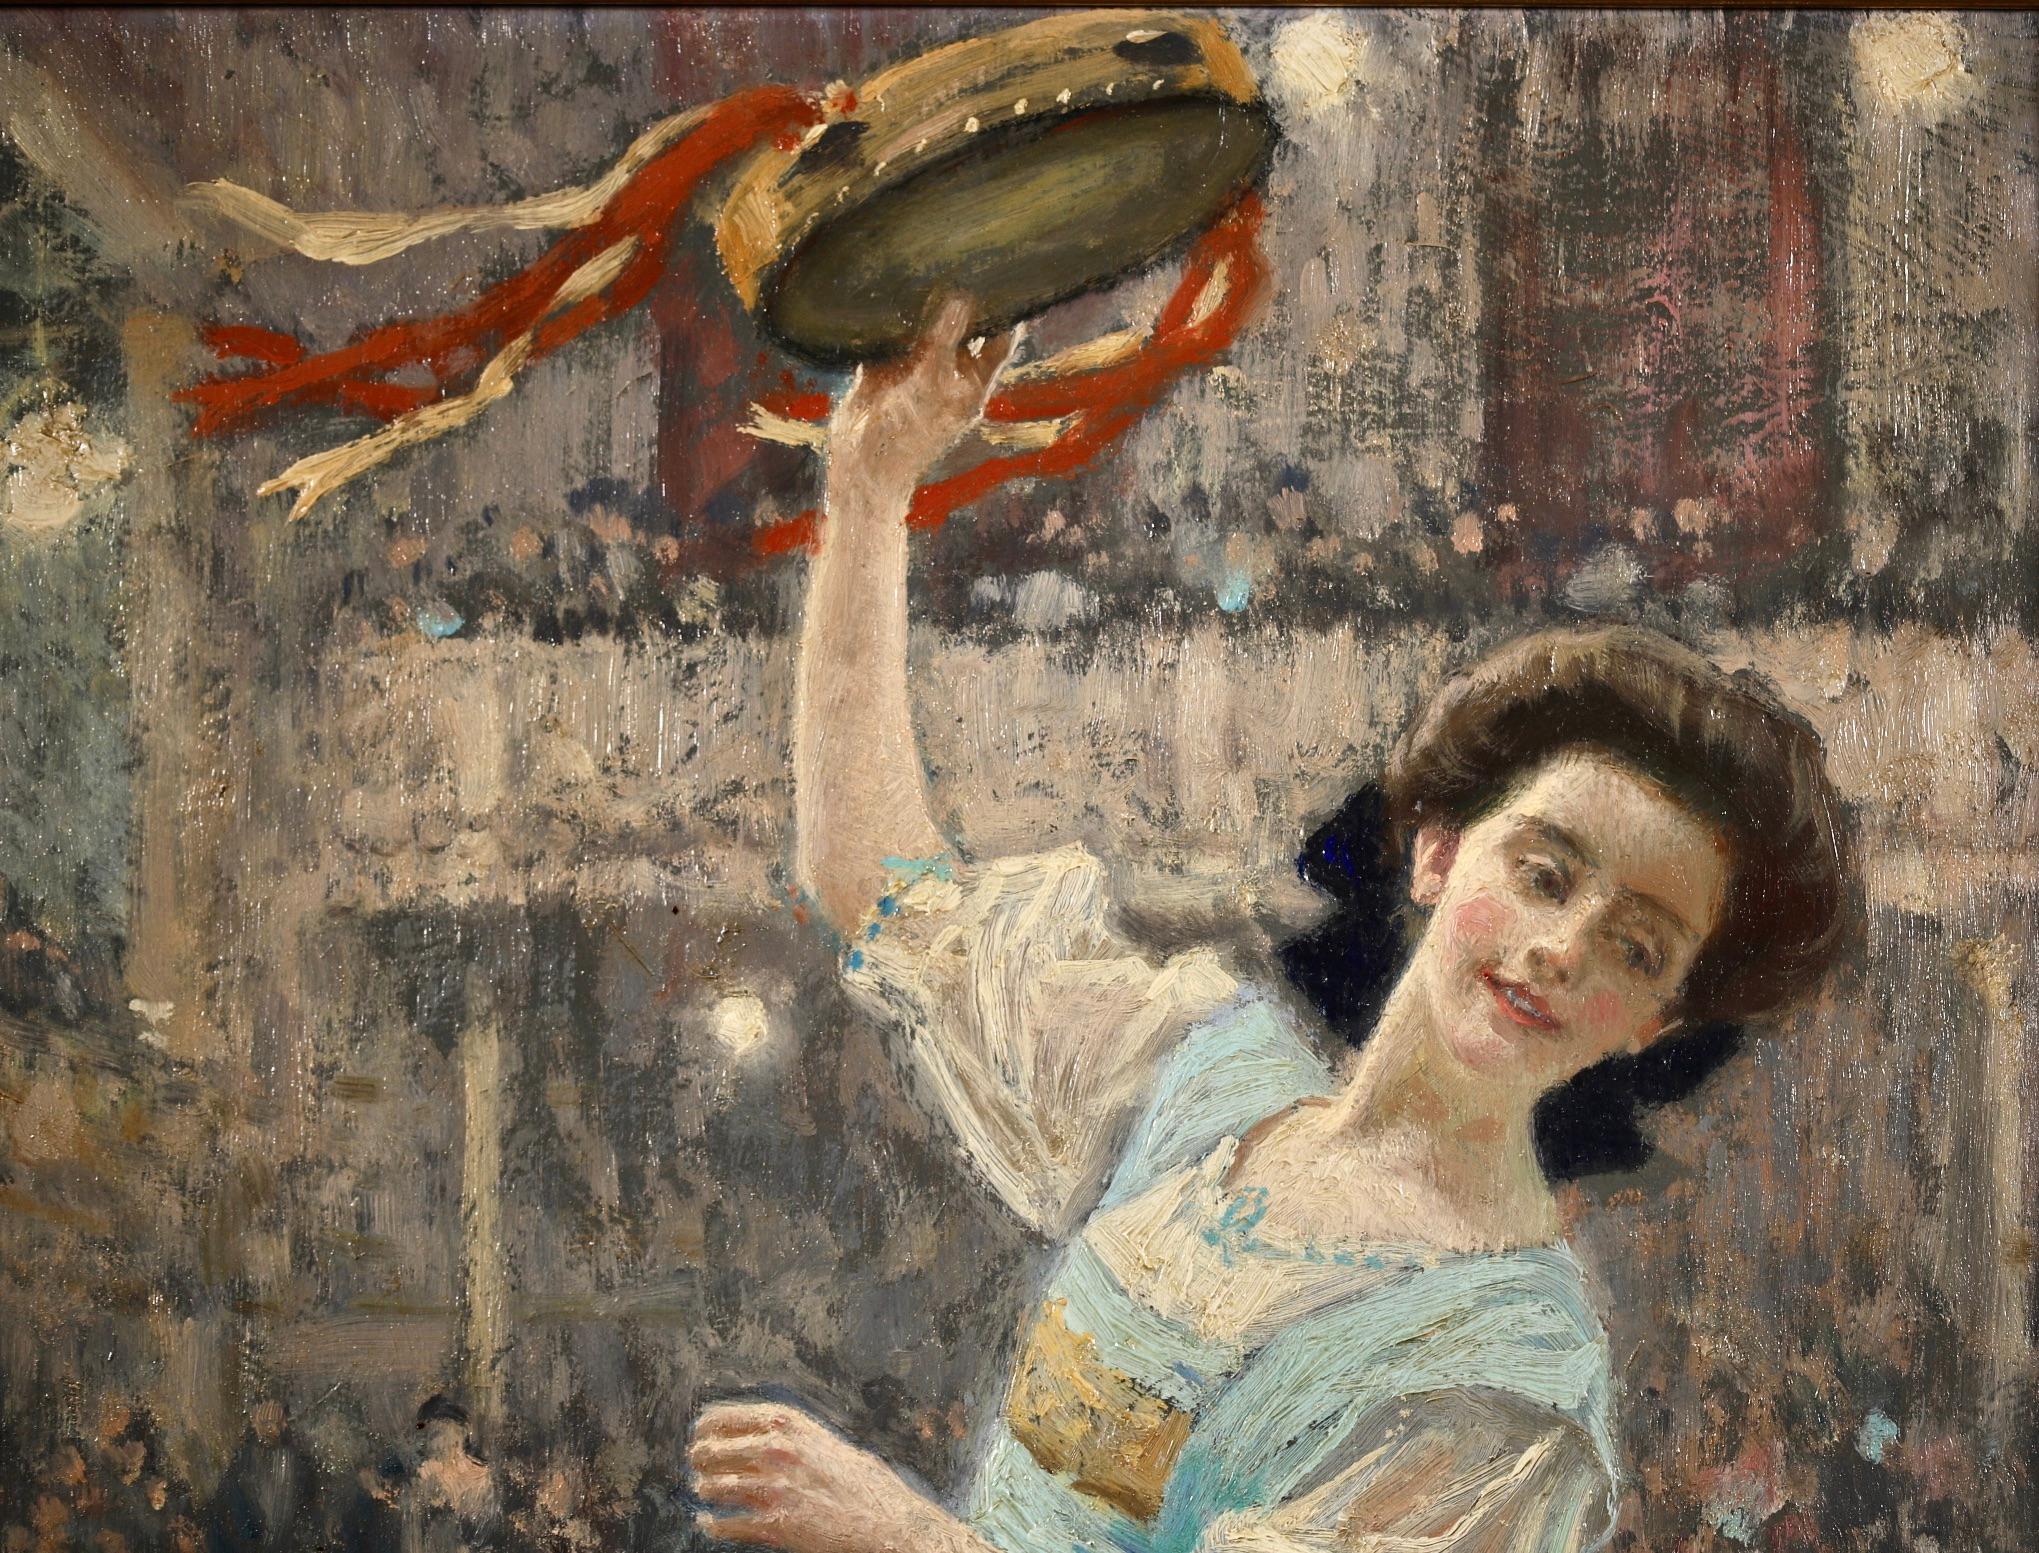 A simply beautiful oil on panel by Danish realist painter Paul Gustav Fischer. The work depicts a young woman wearing pink ballet shoes and a flowing blue dress performing a dance in a ballroom, a tambourine raised above her head and elegant men and